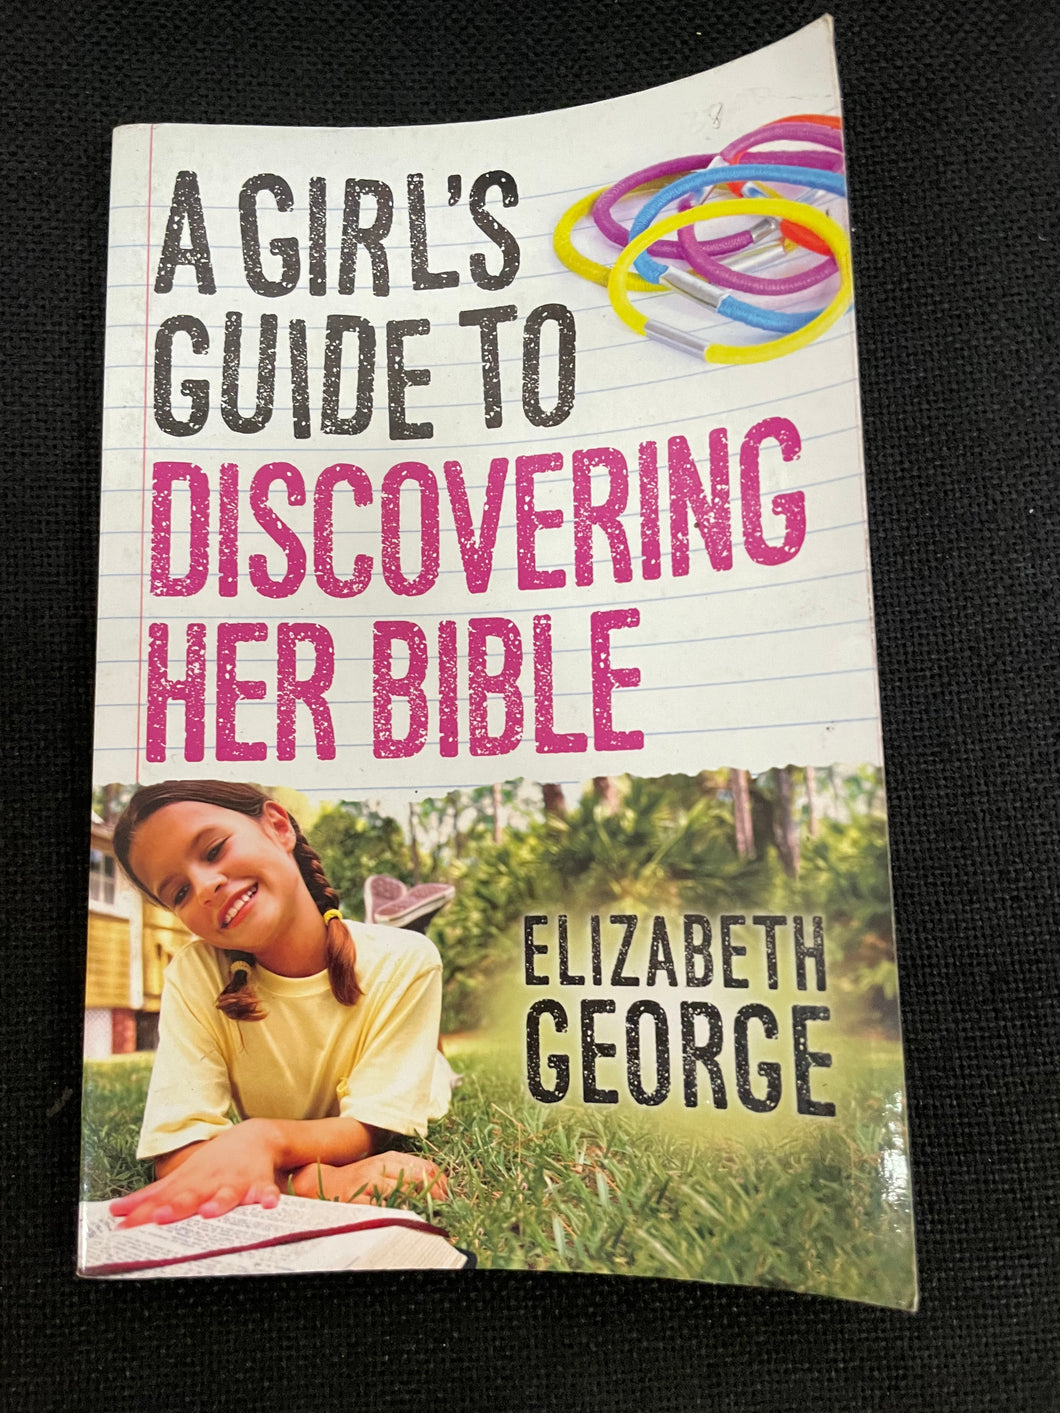 A GIRL’S GUIDE TO DISCOVERING HER BIBLE